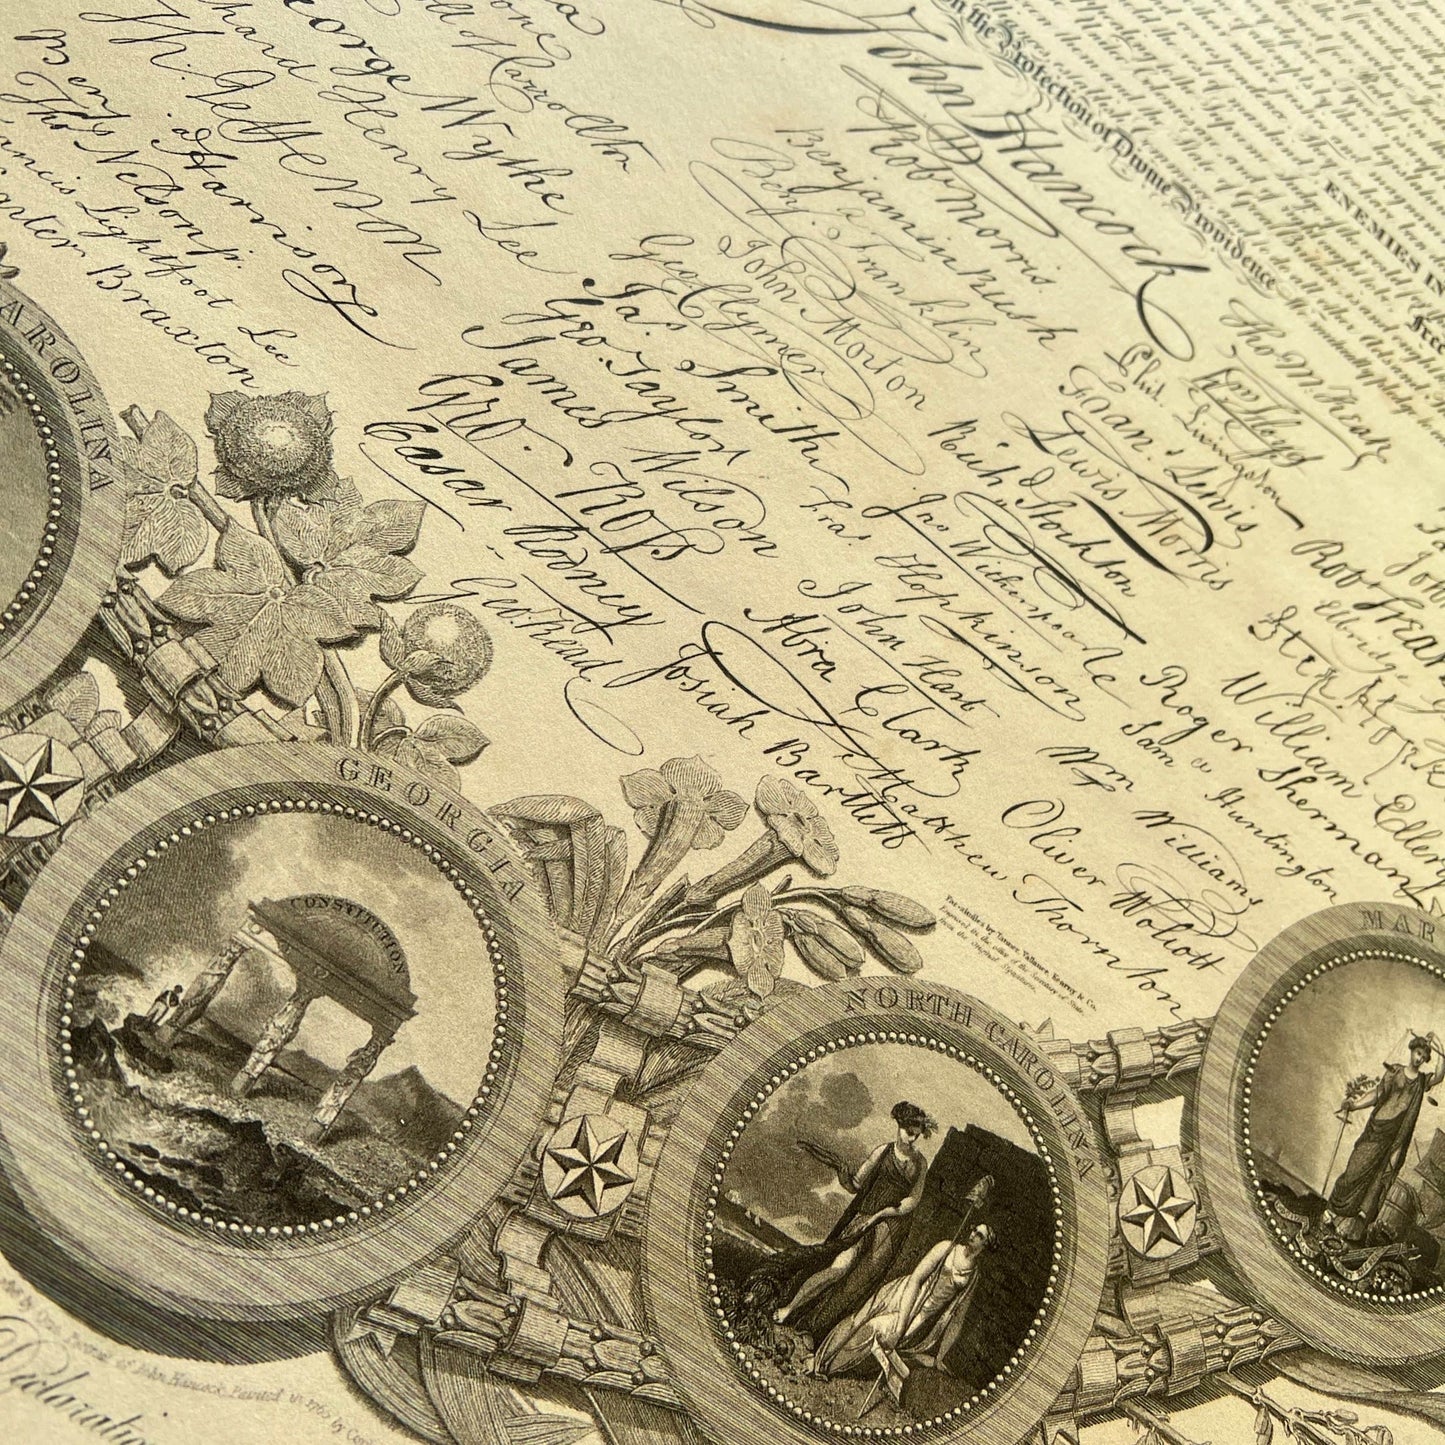 Historic "Declaration of Independence" engraving by publisher John Binns Archival print